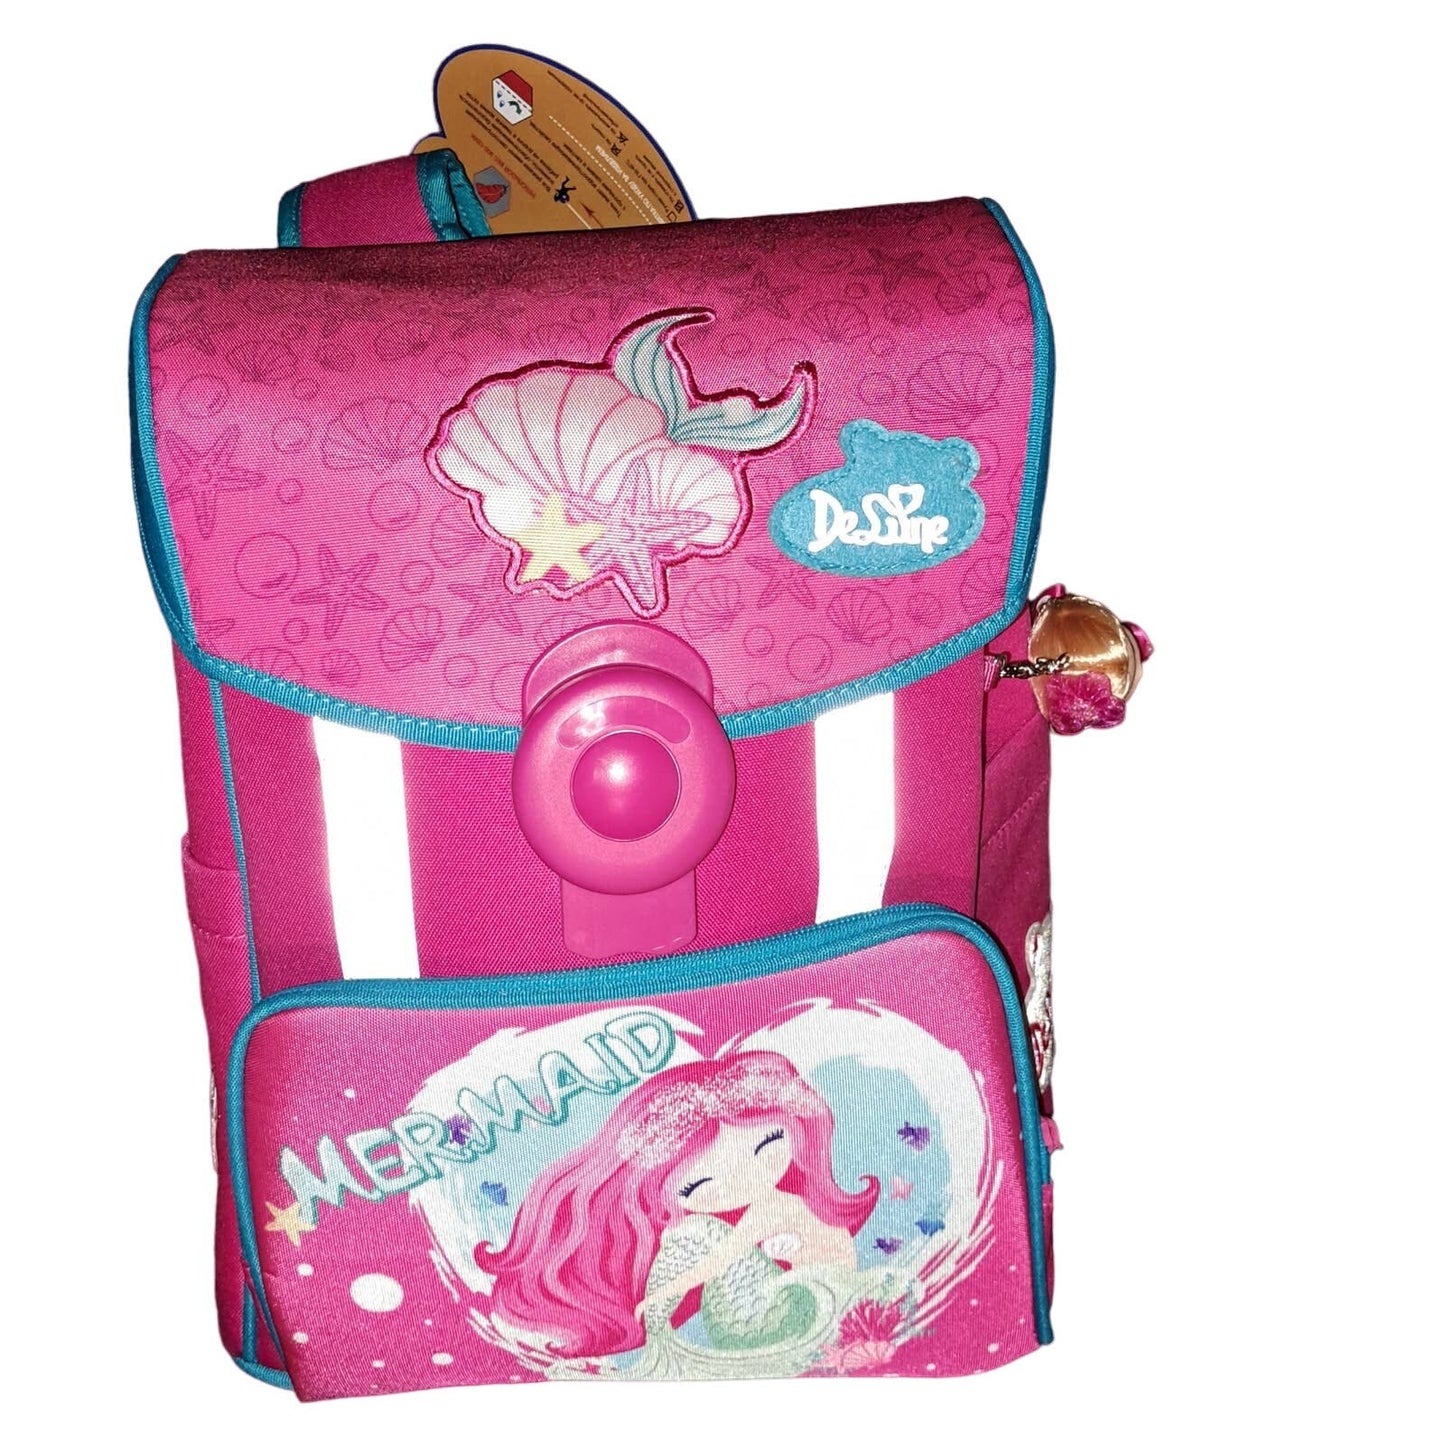 SALE!!! New Delune mermaid backpack spine protect